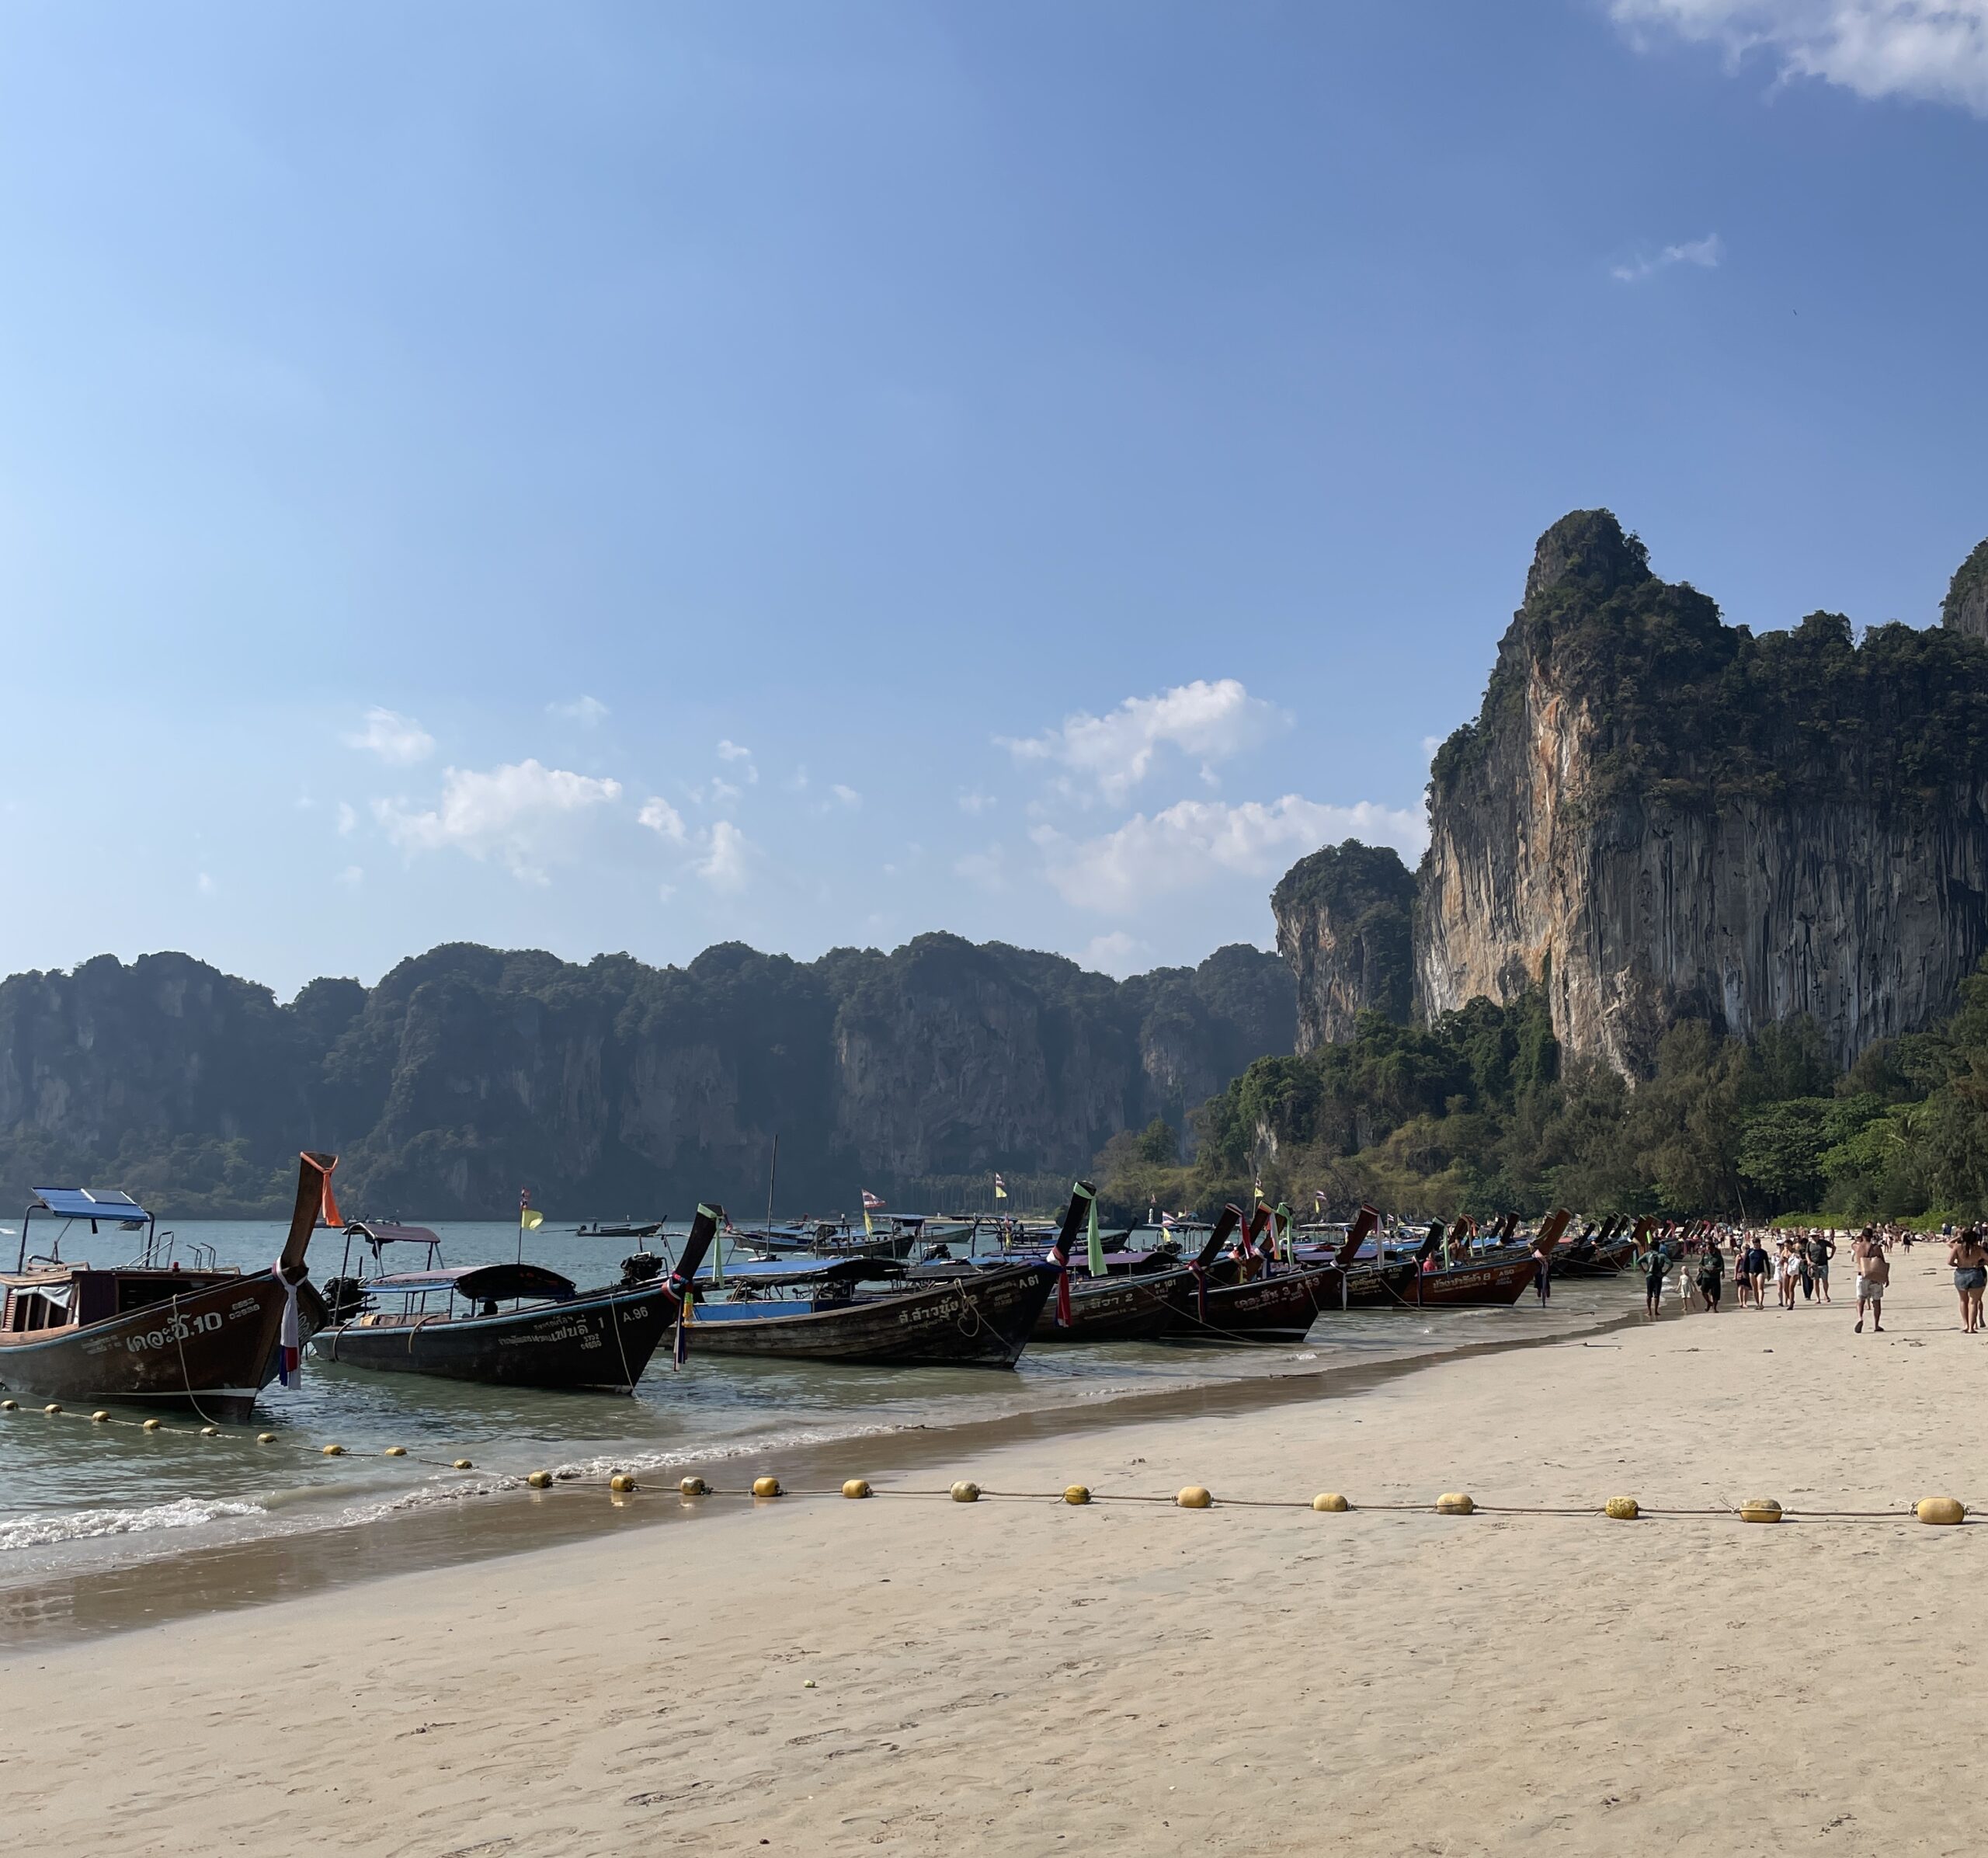 Two Adventures You Don't Want To Miss At Railay Beach